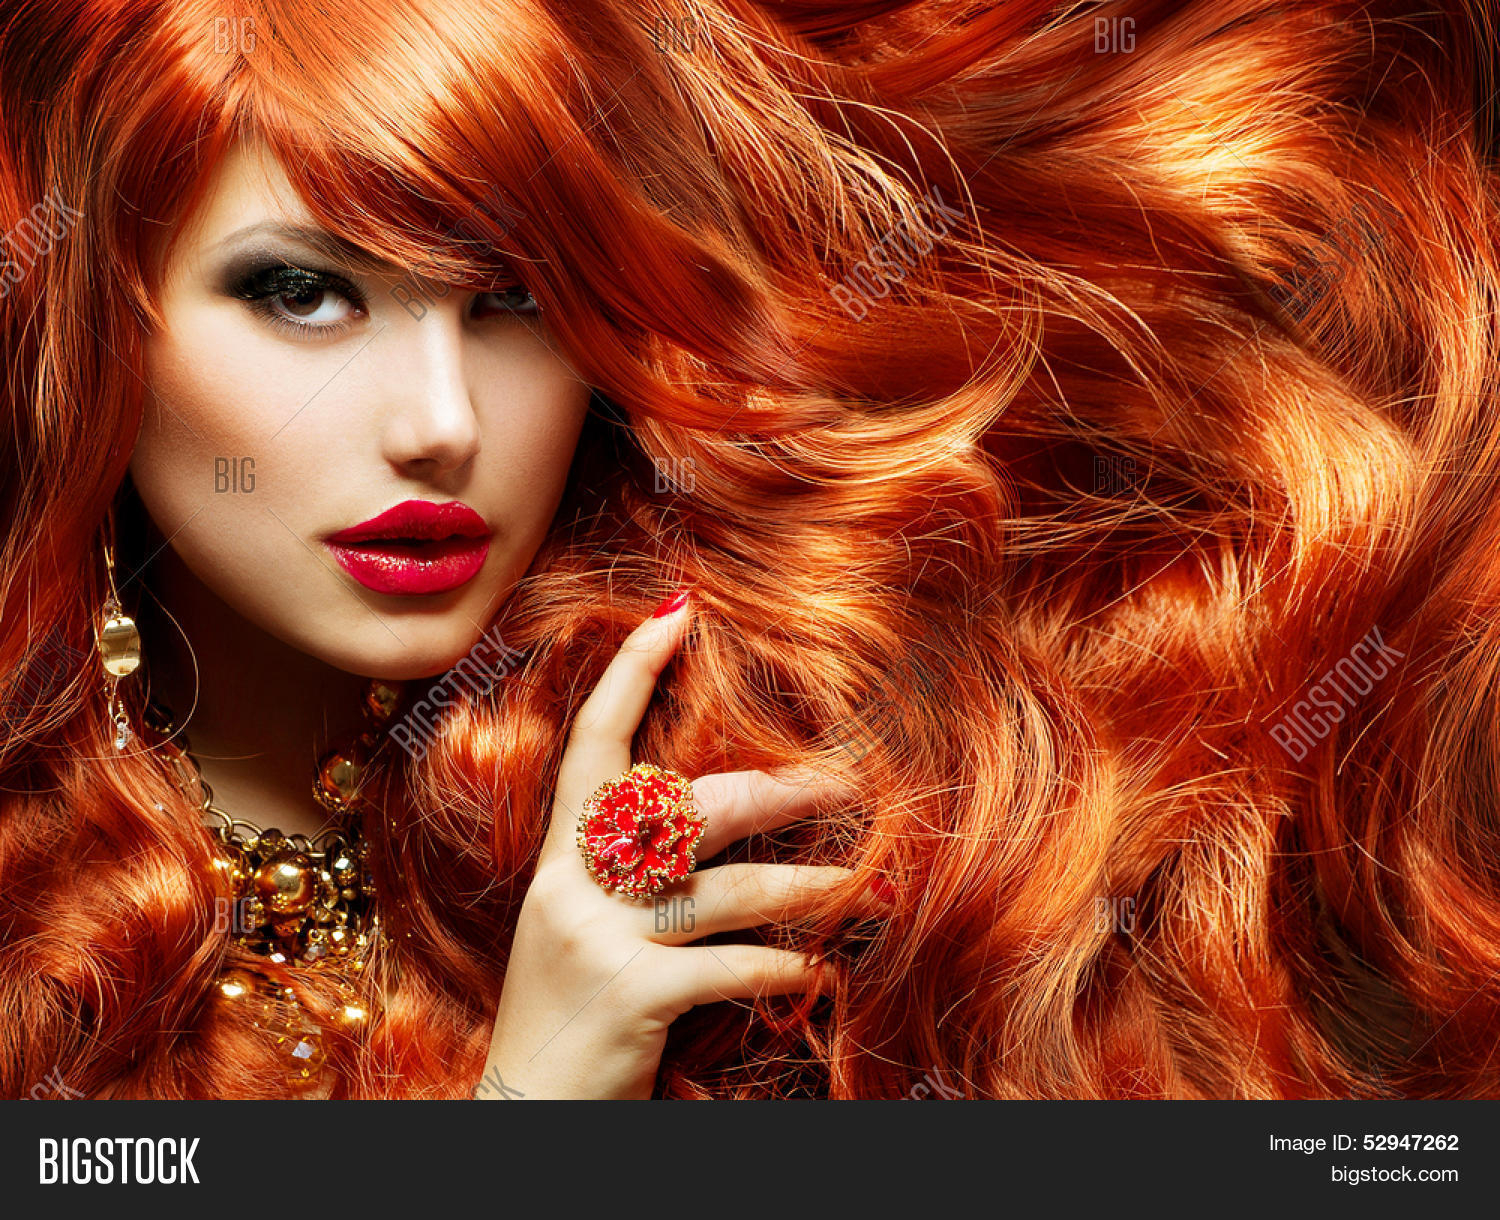 Makeup For Red Hair And Brown Eyes Long Curly Red Hair Image Photo Free Trial Bigstock